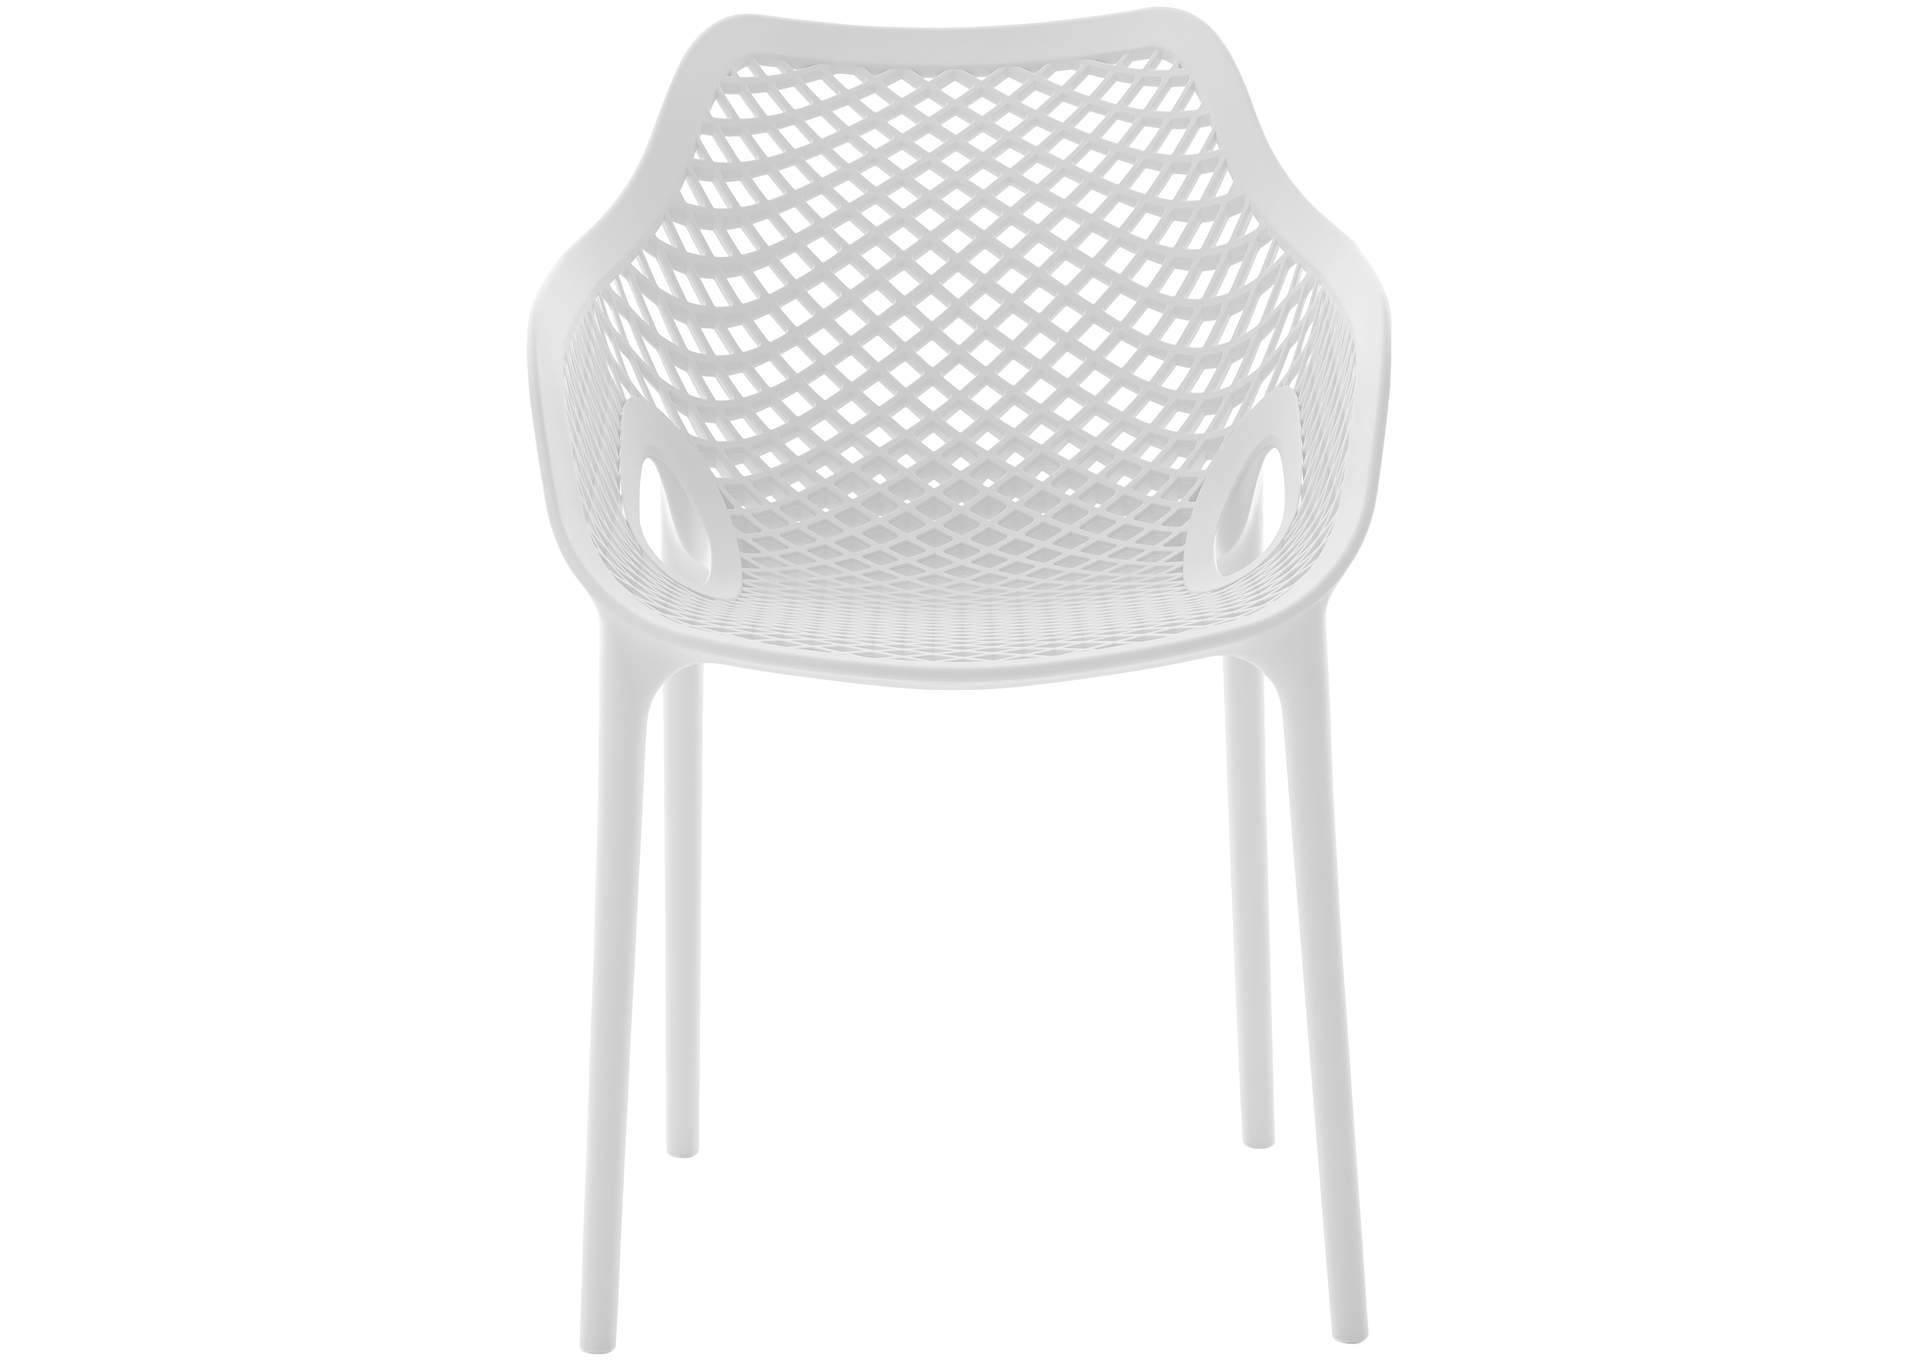 Mykonos White Outdoor Patio Dining Chair Set of 4,Meridian Furniture